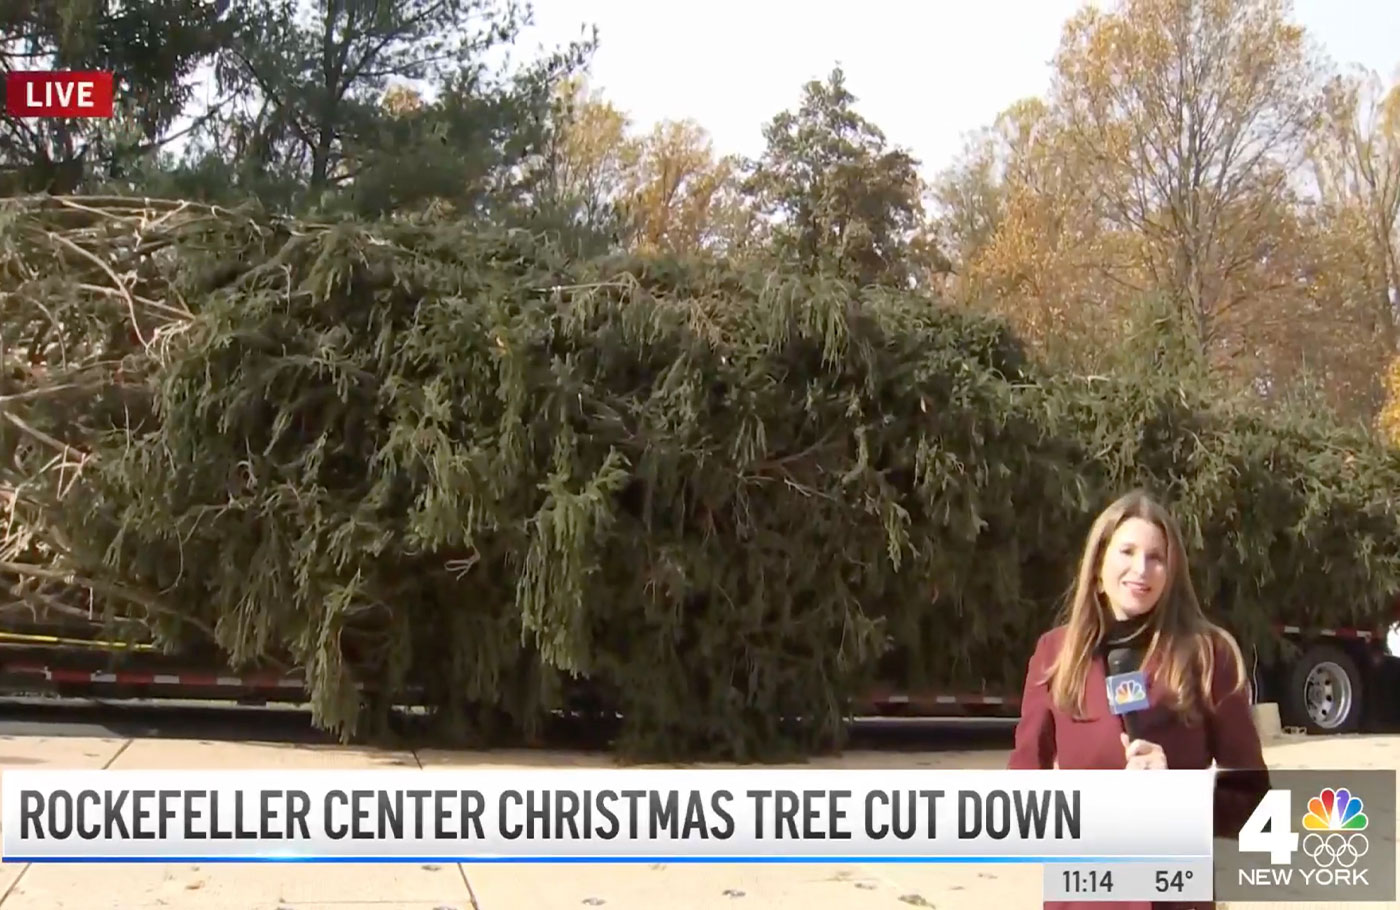 Jen Maxfield reports: First They Said No Way — Now Rock Center Tree Donated by Md. Family Heads for NYC